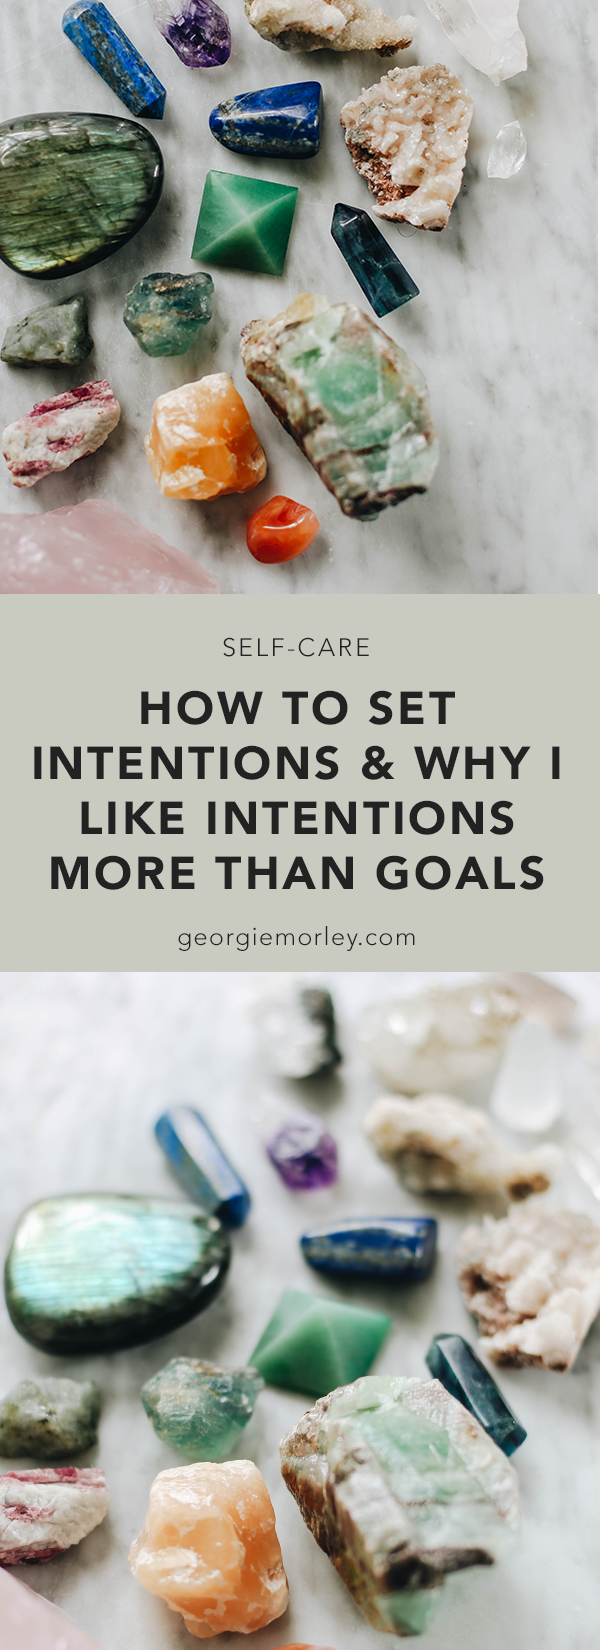 How to Set Intentions & Why I Like Intentions More Than Goals